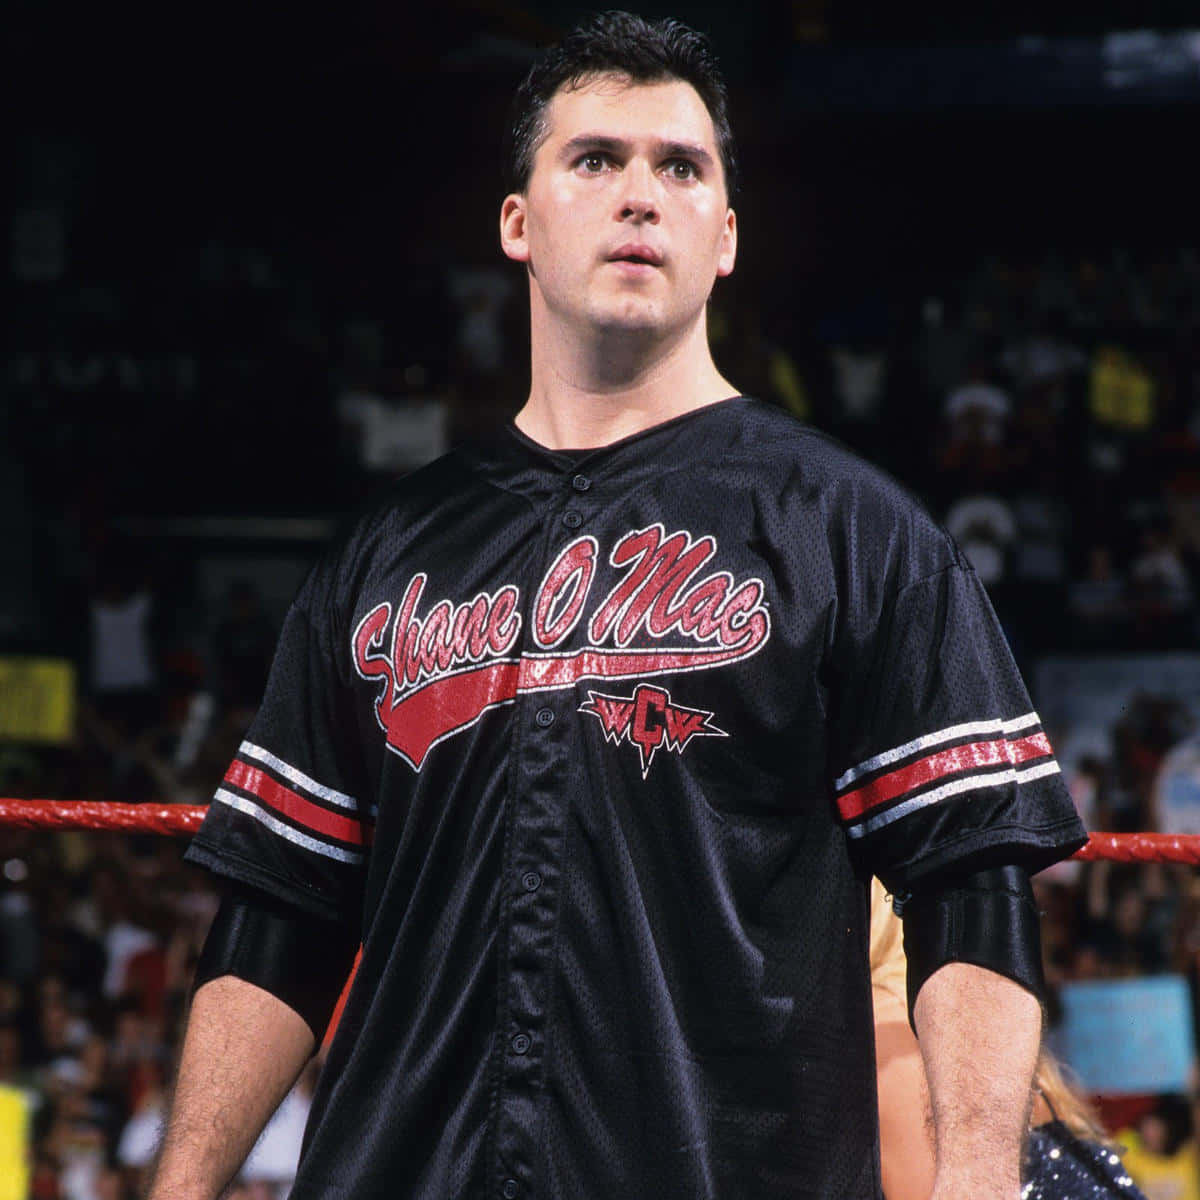 Caption: Shane McMahon in his iconic Shane O'Mac Jersey; a legend in professional wrestling. Wallpaper